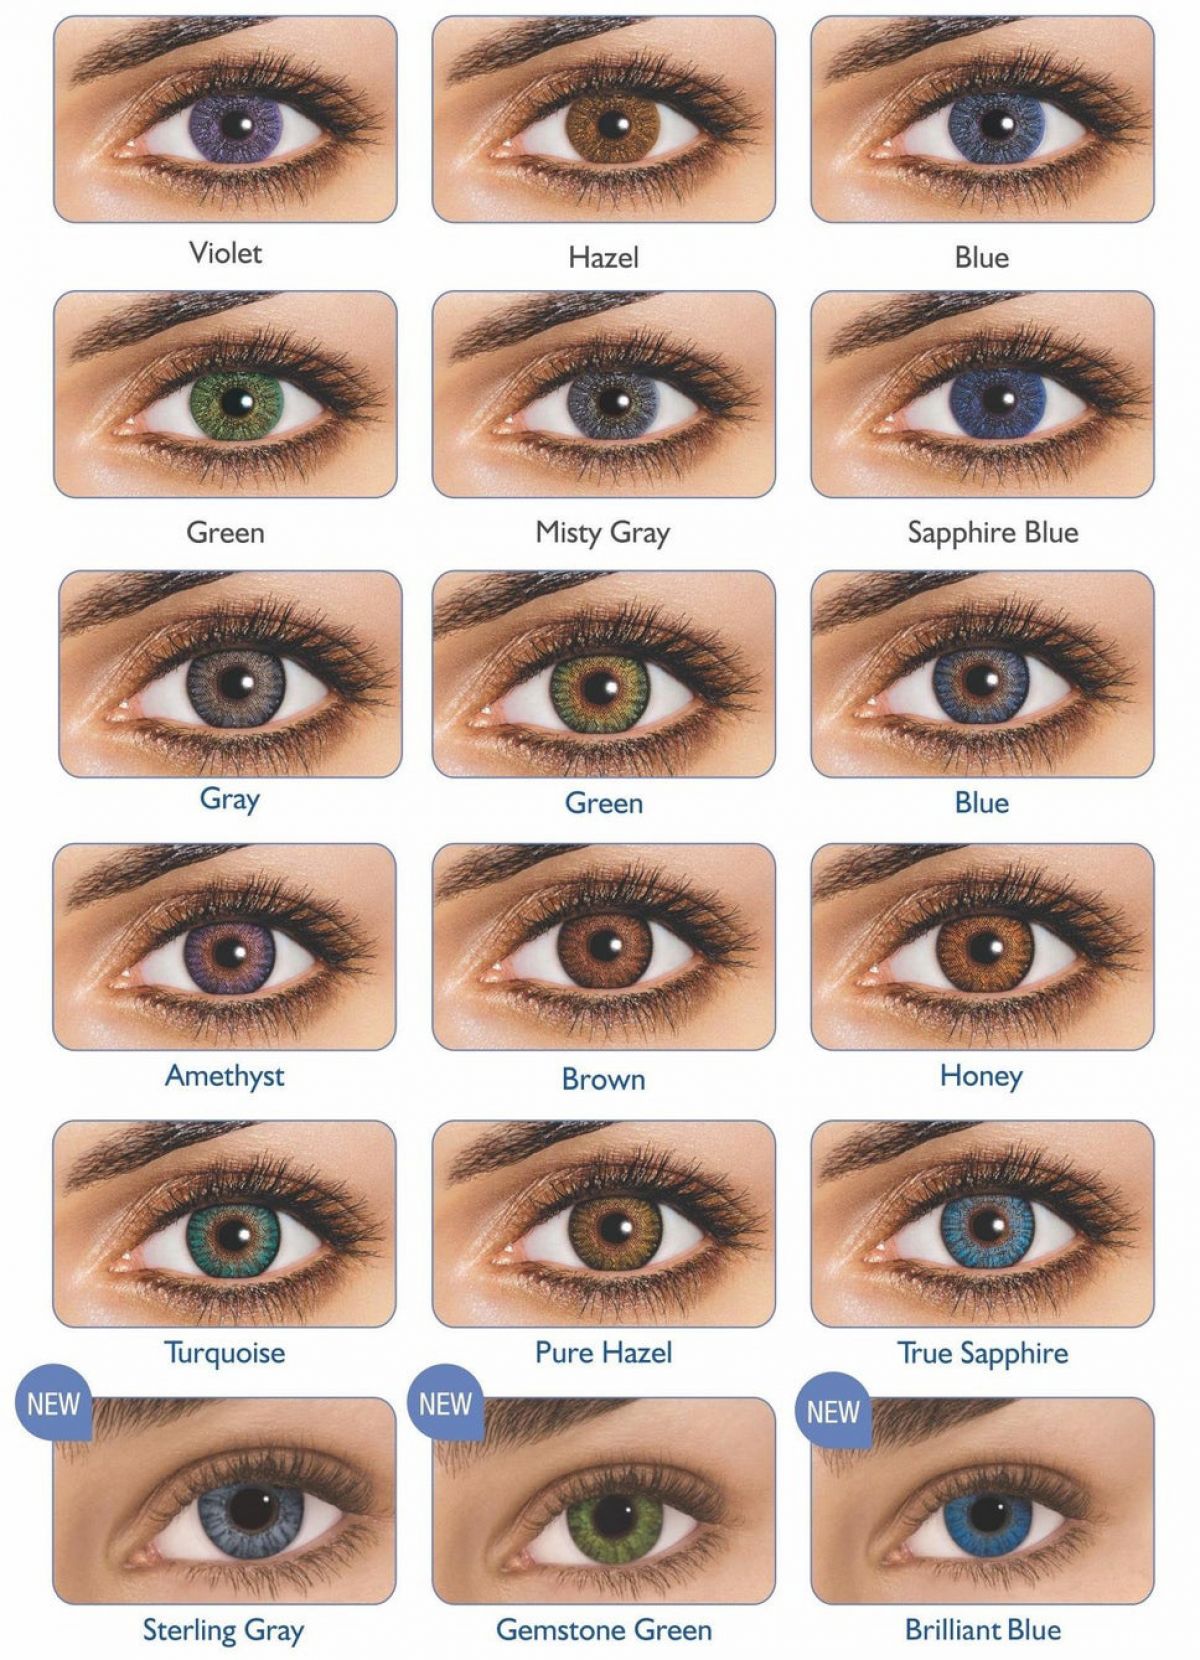 FRESHLOOK COLORBLENDS MONHTLY DISPOSABLE COLORED CONTACT LENSES (2 LENSES)